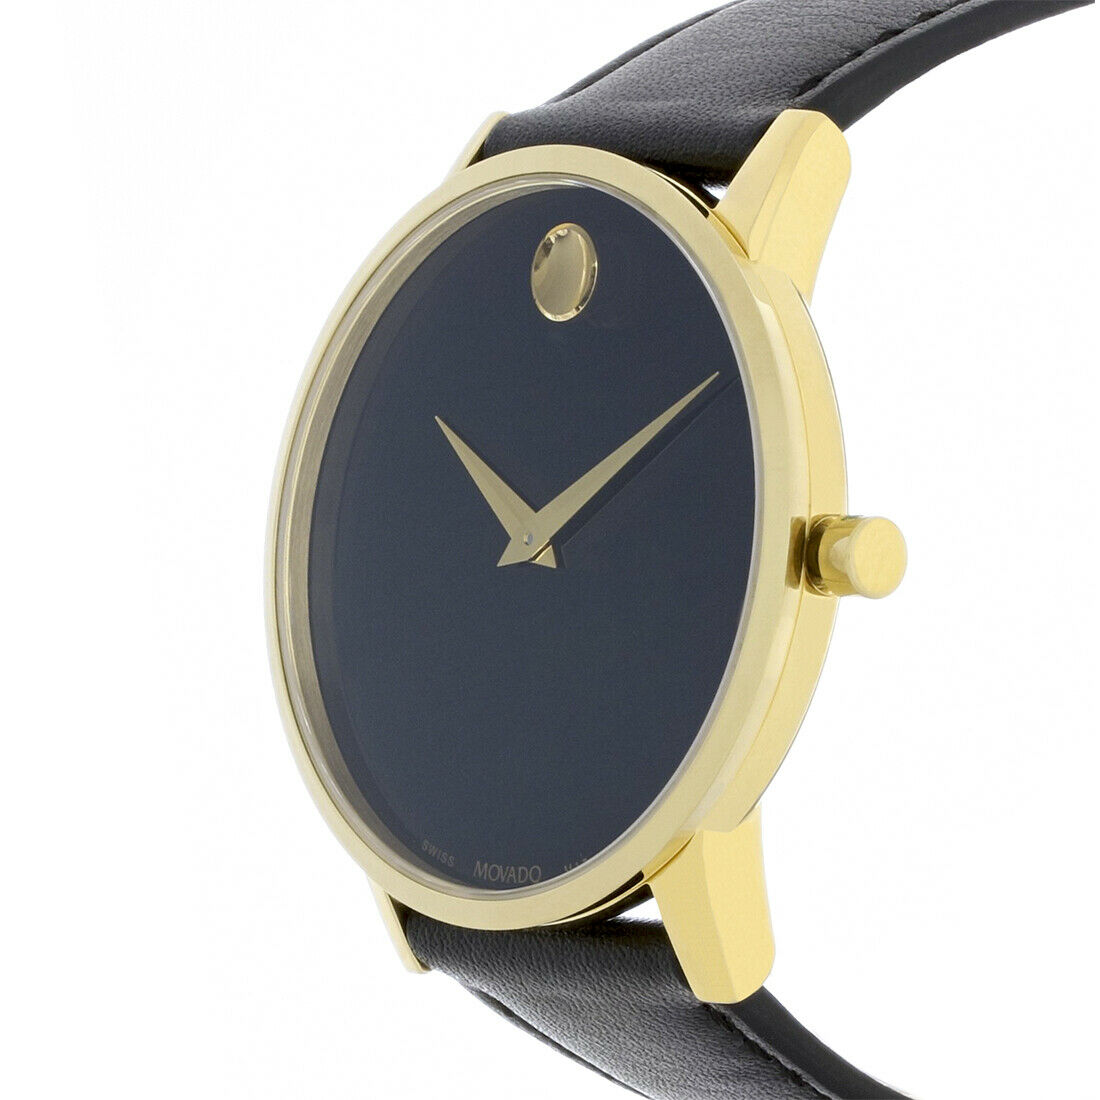 Museum Classic Black & Gold | Movado | Luby 